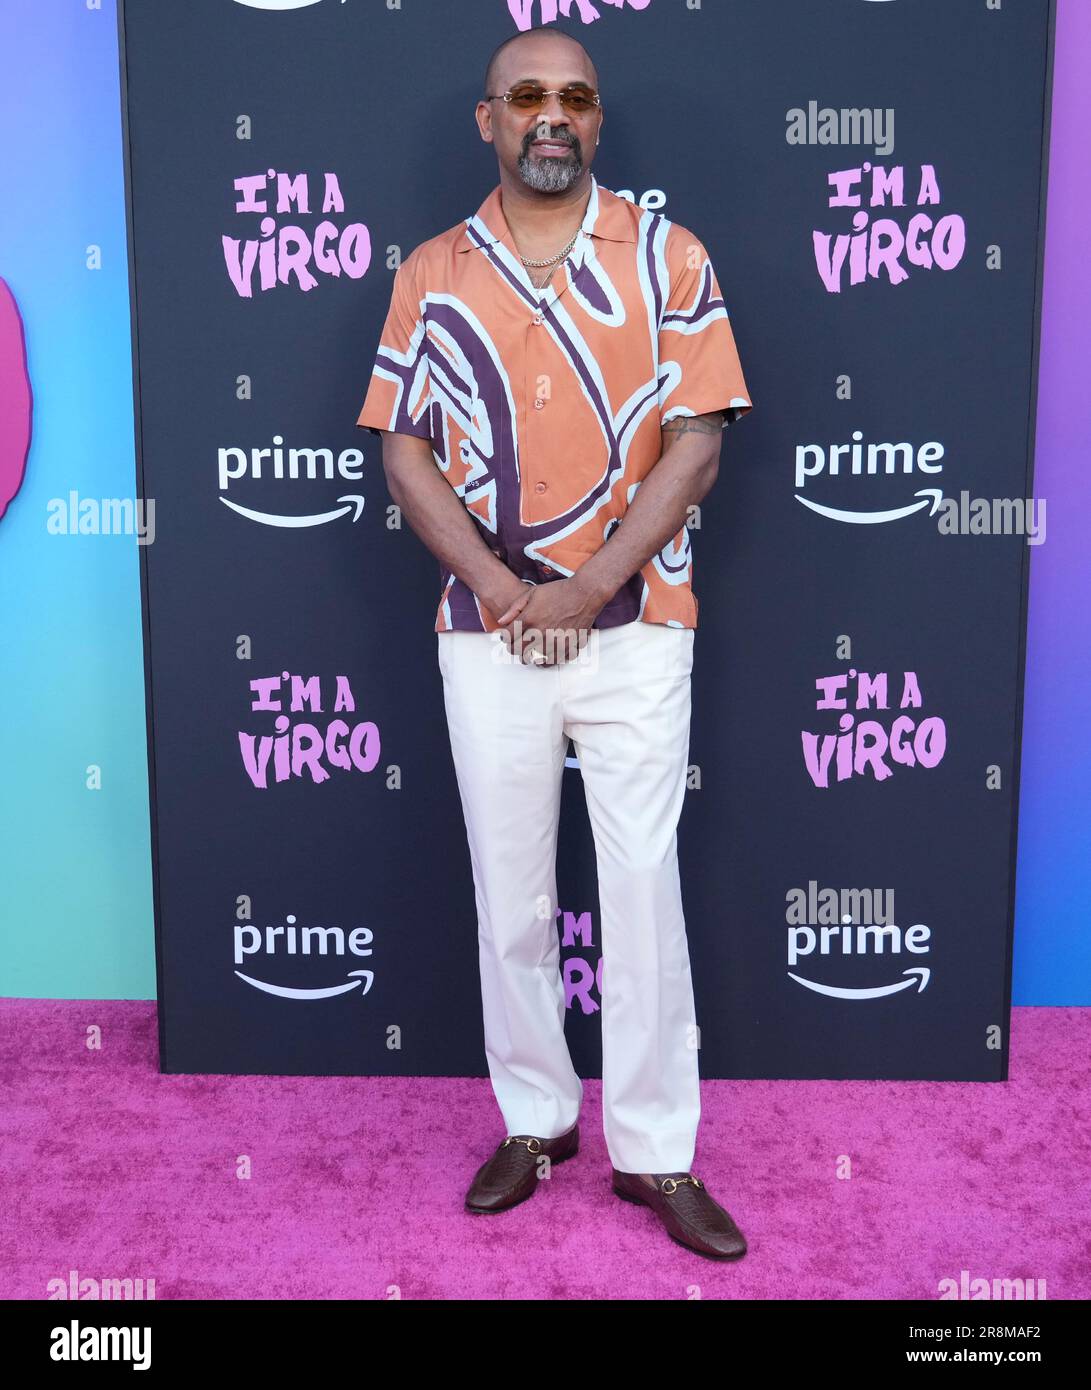 Los Angeles Usa 21st June 2023 Mike Epps Arrives At The Prime Videos Im A Virgo Los Angeles Premiere Held At The Harmony Gold In Los Angeles Ca On Wednesday June 21 2023 Photo By Sthanlee B Miradorsipa Usa Credit Sipa Usalamy Live News 2R8MAF2 